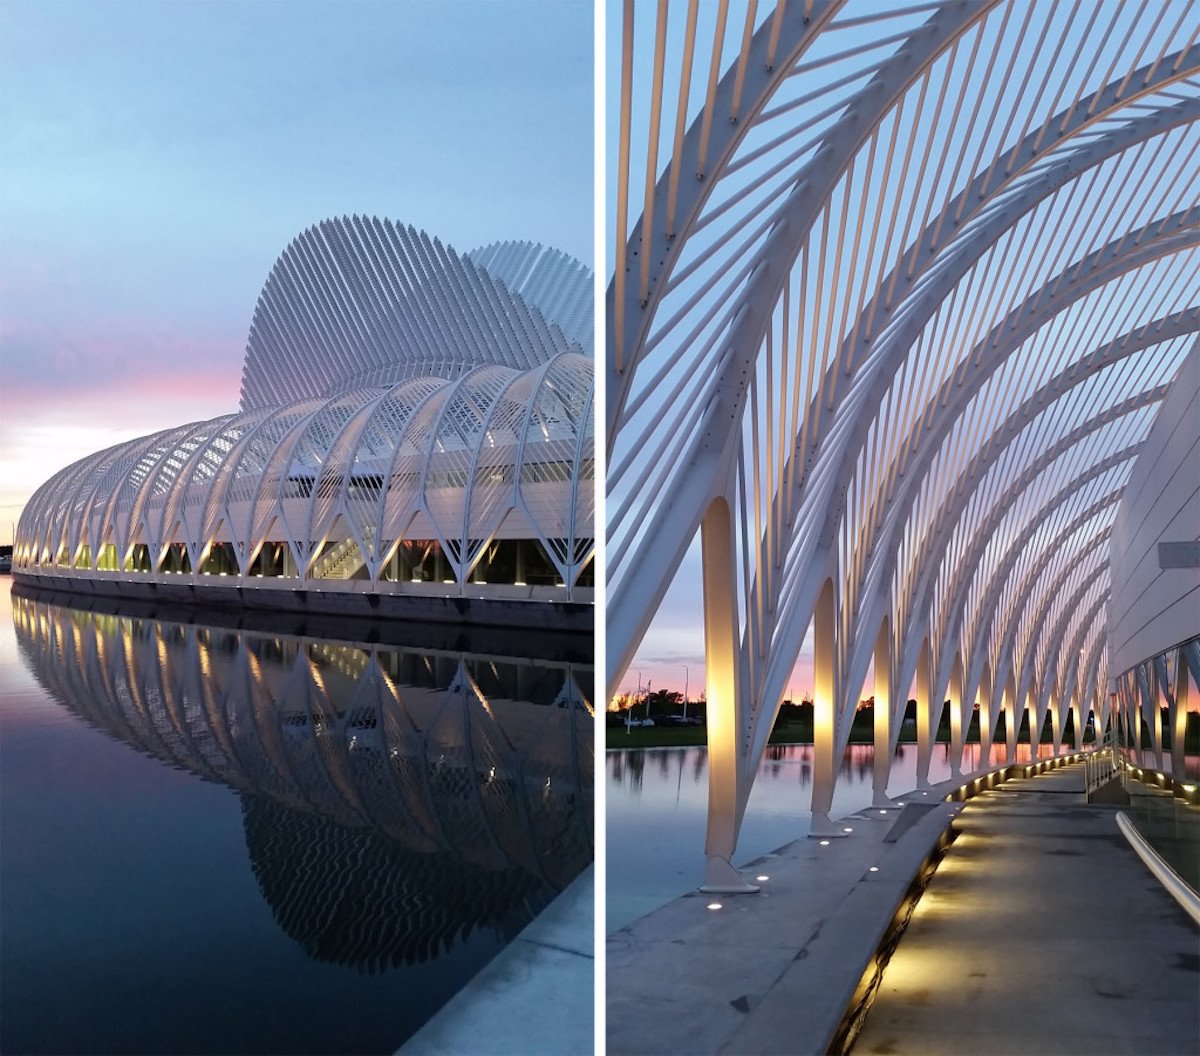 The Innovation, Science, and Technology building at Florida Polytechnic University in Lakeland.